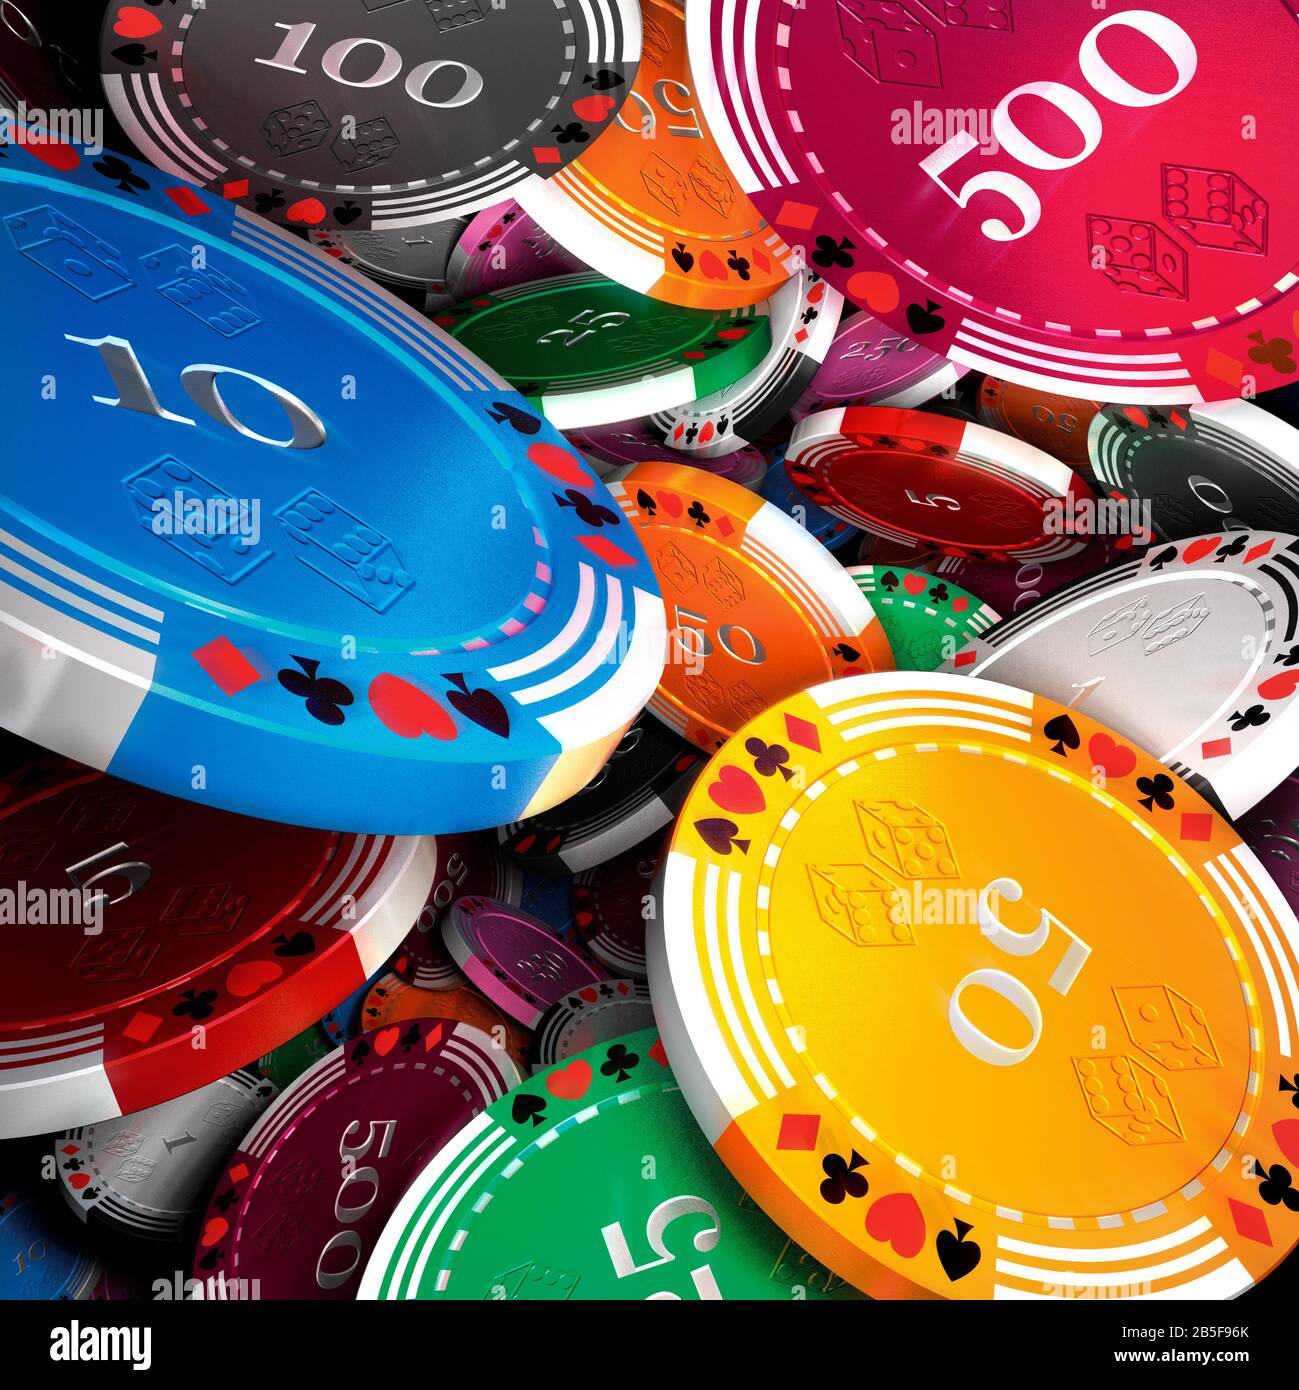 Gambling chips falling, thrown in the air. Chance Decision. Risk. Casino, Las vegas. Stock Photo